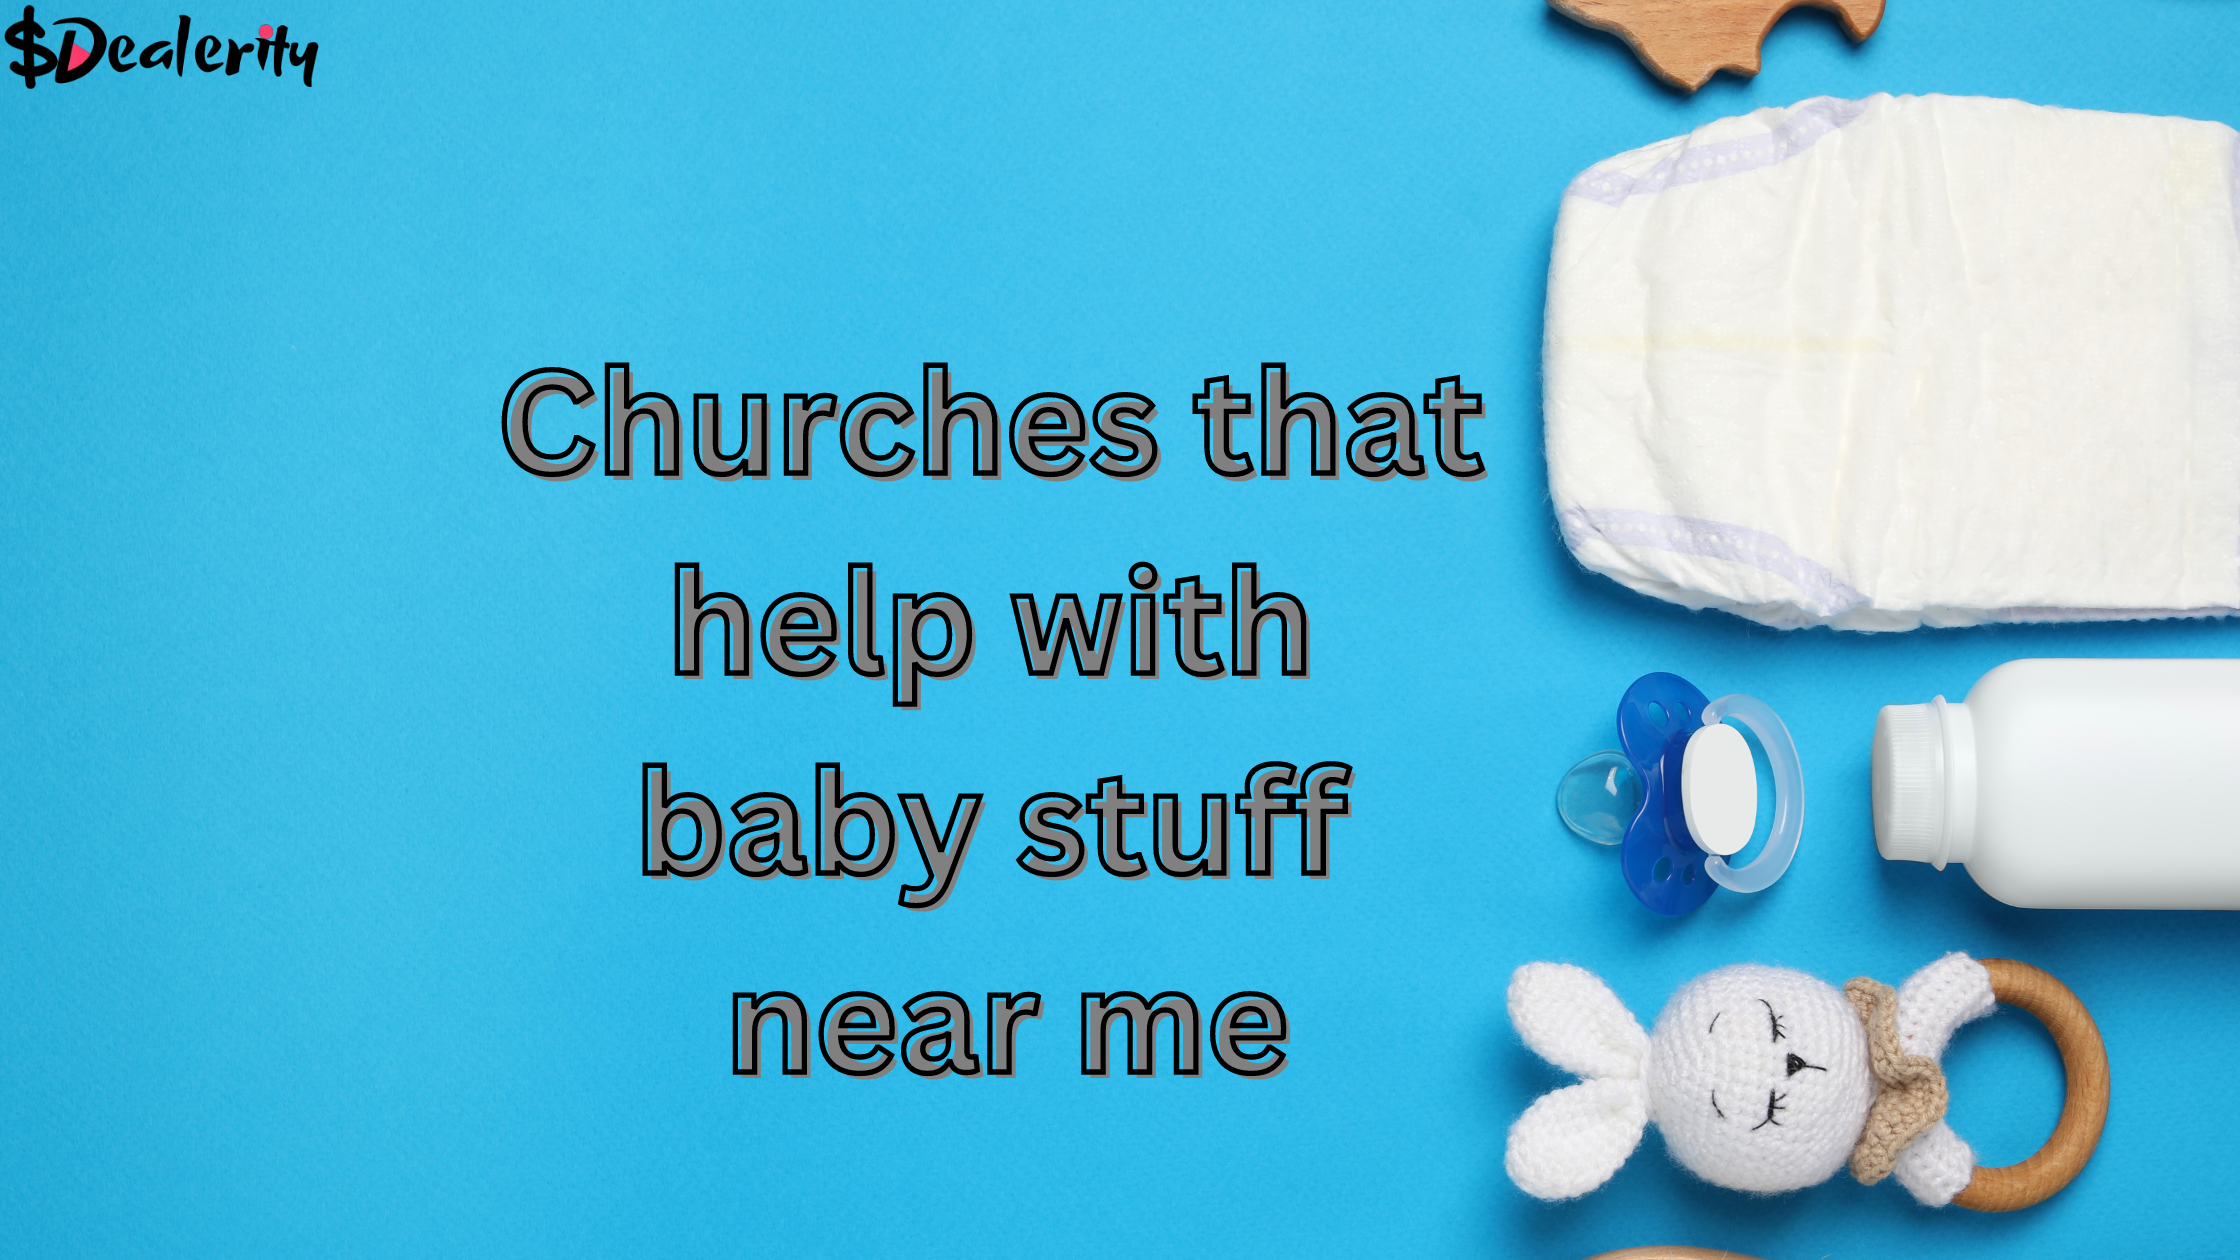 Churches that help with baby stuff near me